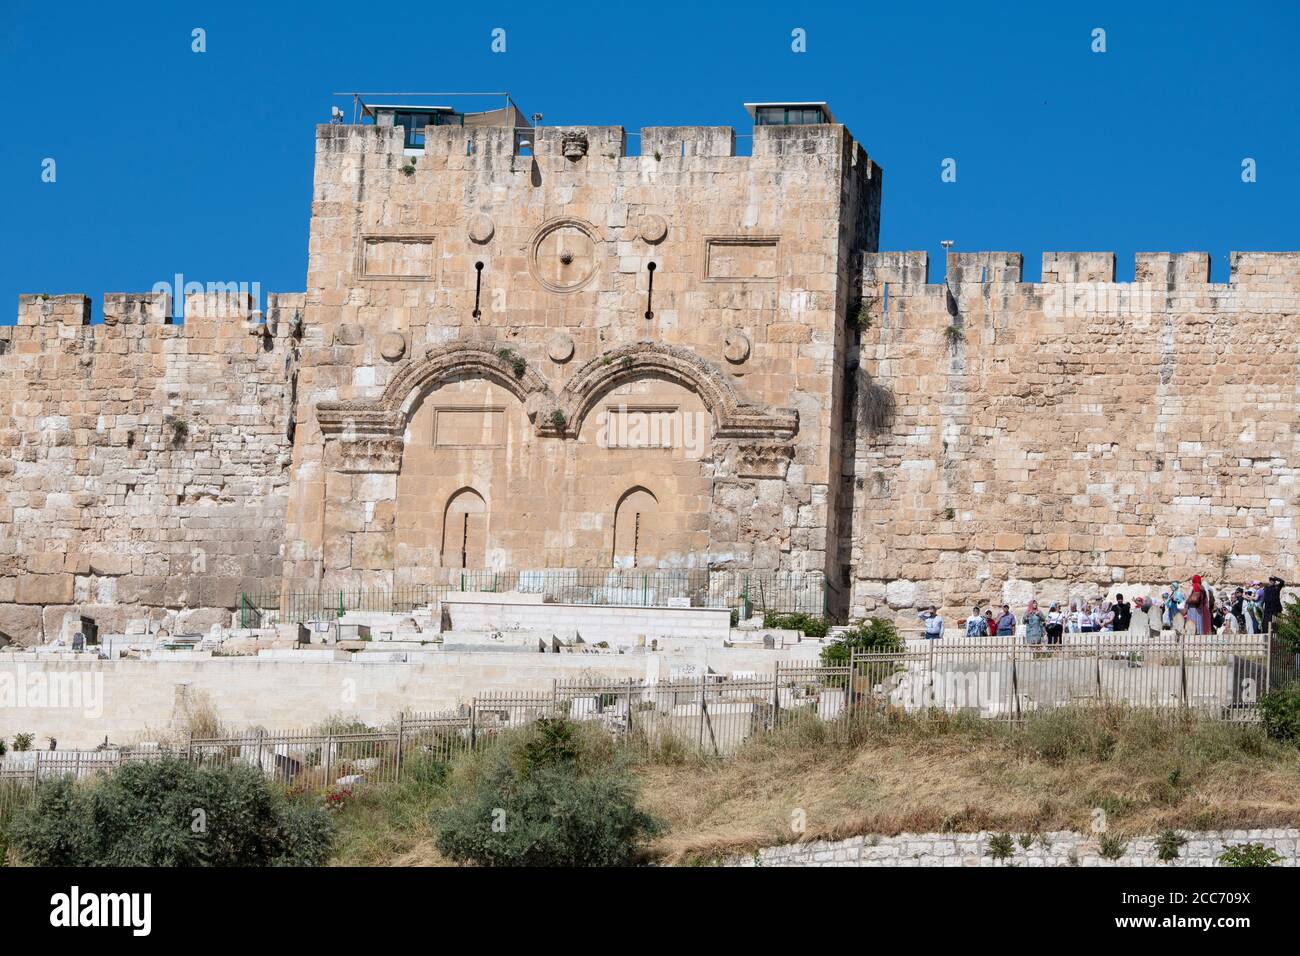 Israel, Jerusalem. The Golden Gate, the only eastern gate of the Temple of the Mount. AKA Gate of Mercy, Shushan Gate, Bab al-Dhahabi. Stock Photo